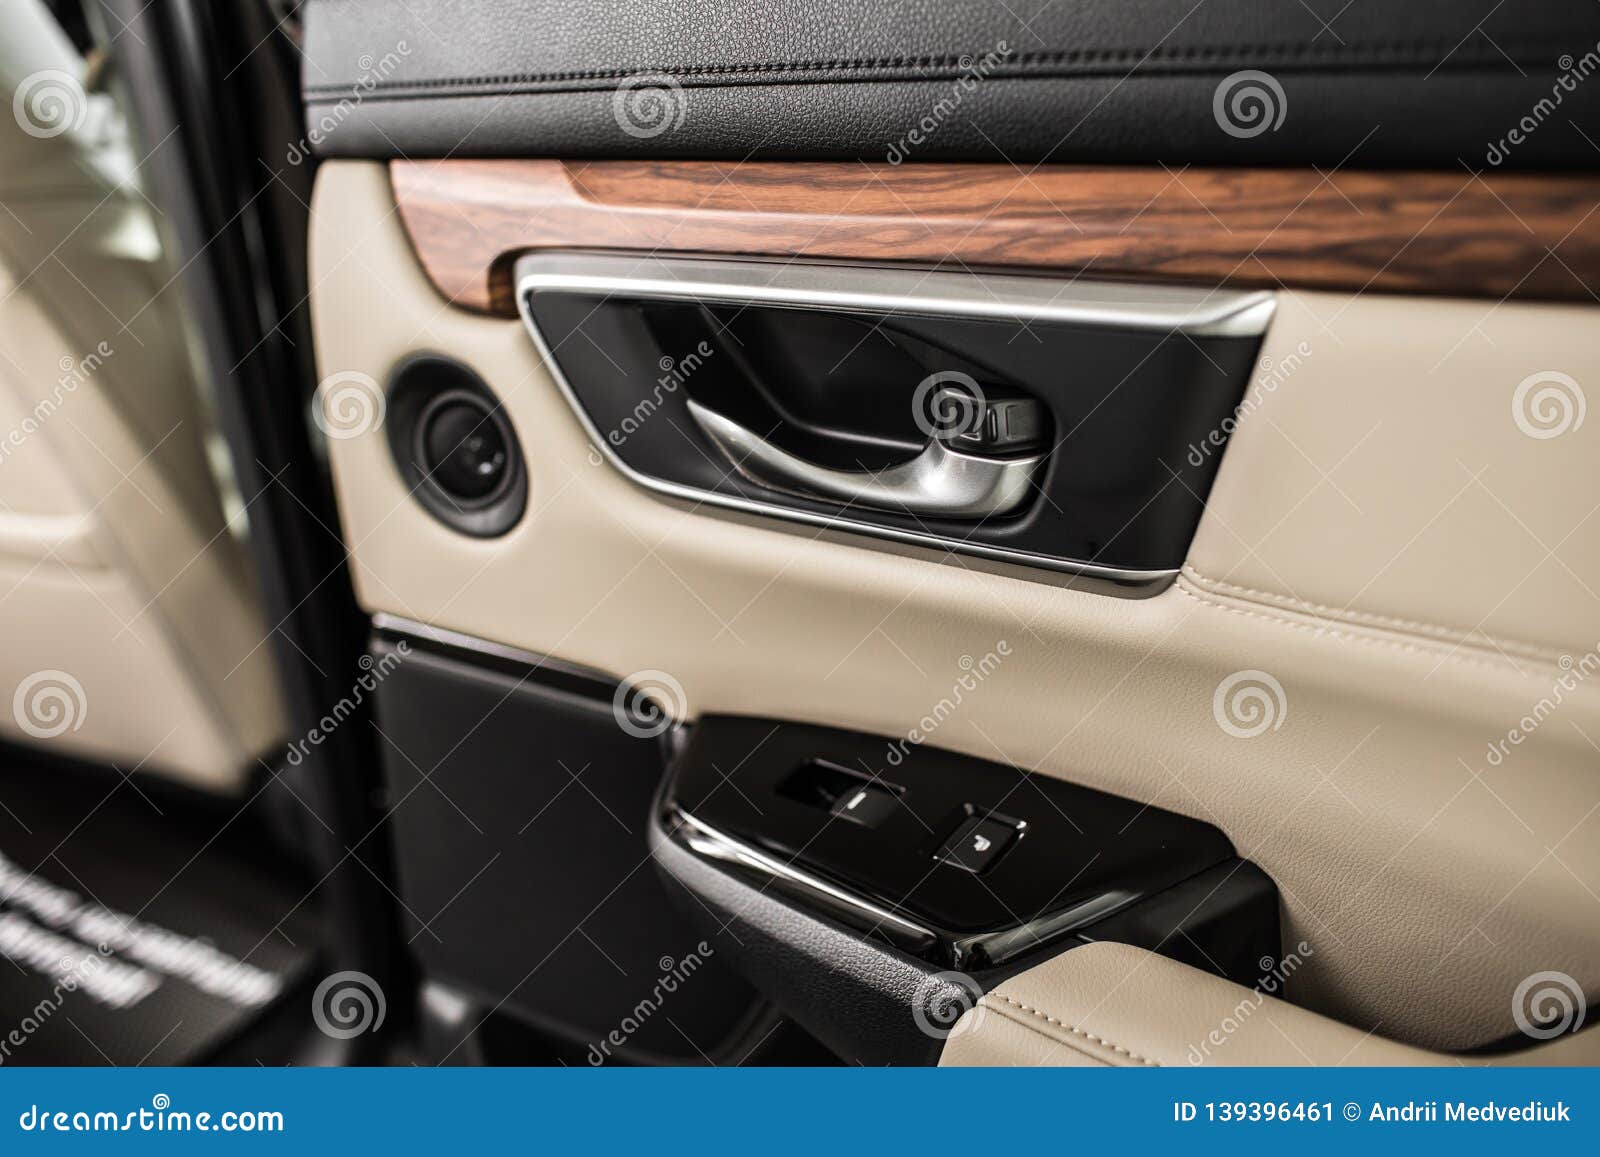 Details Of Stylish Car Interior Leather Interior Stock